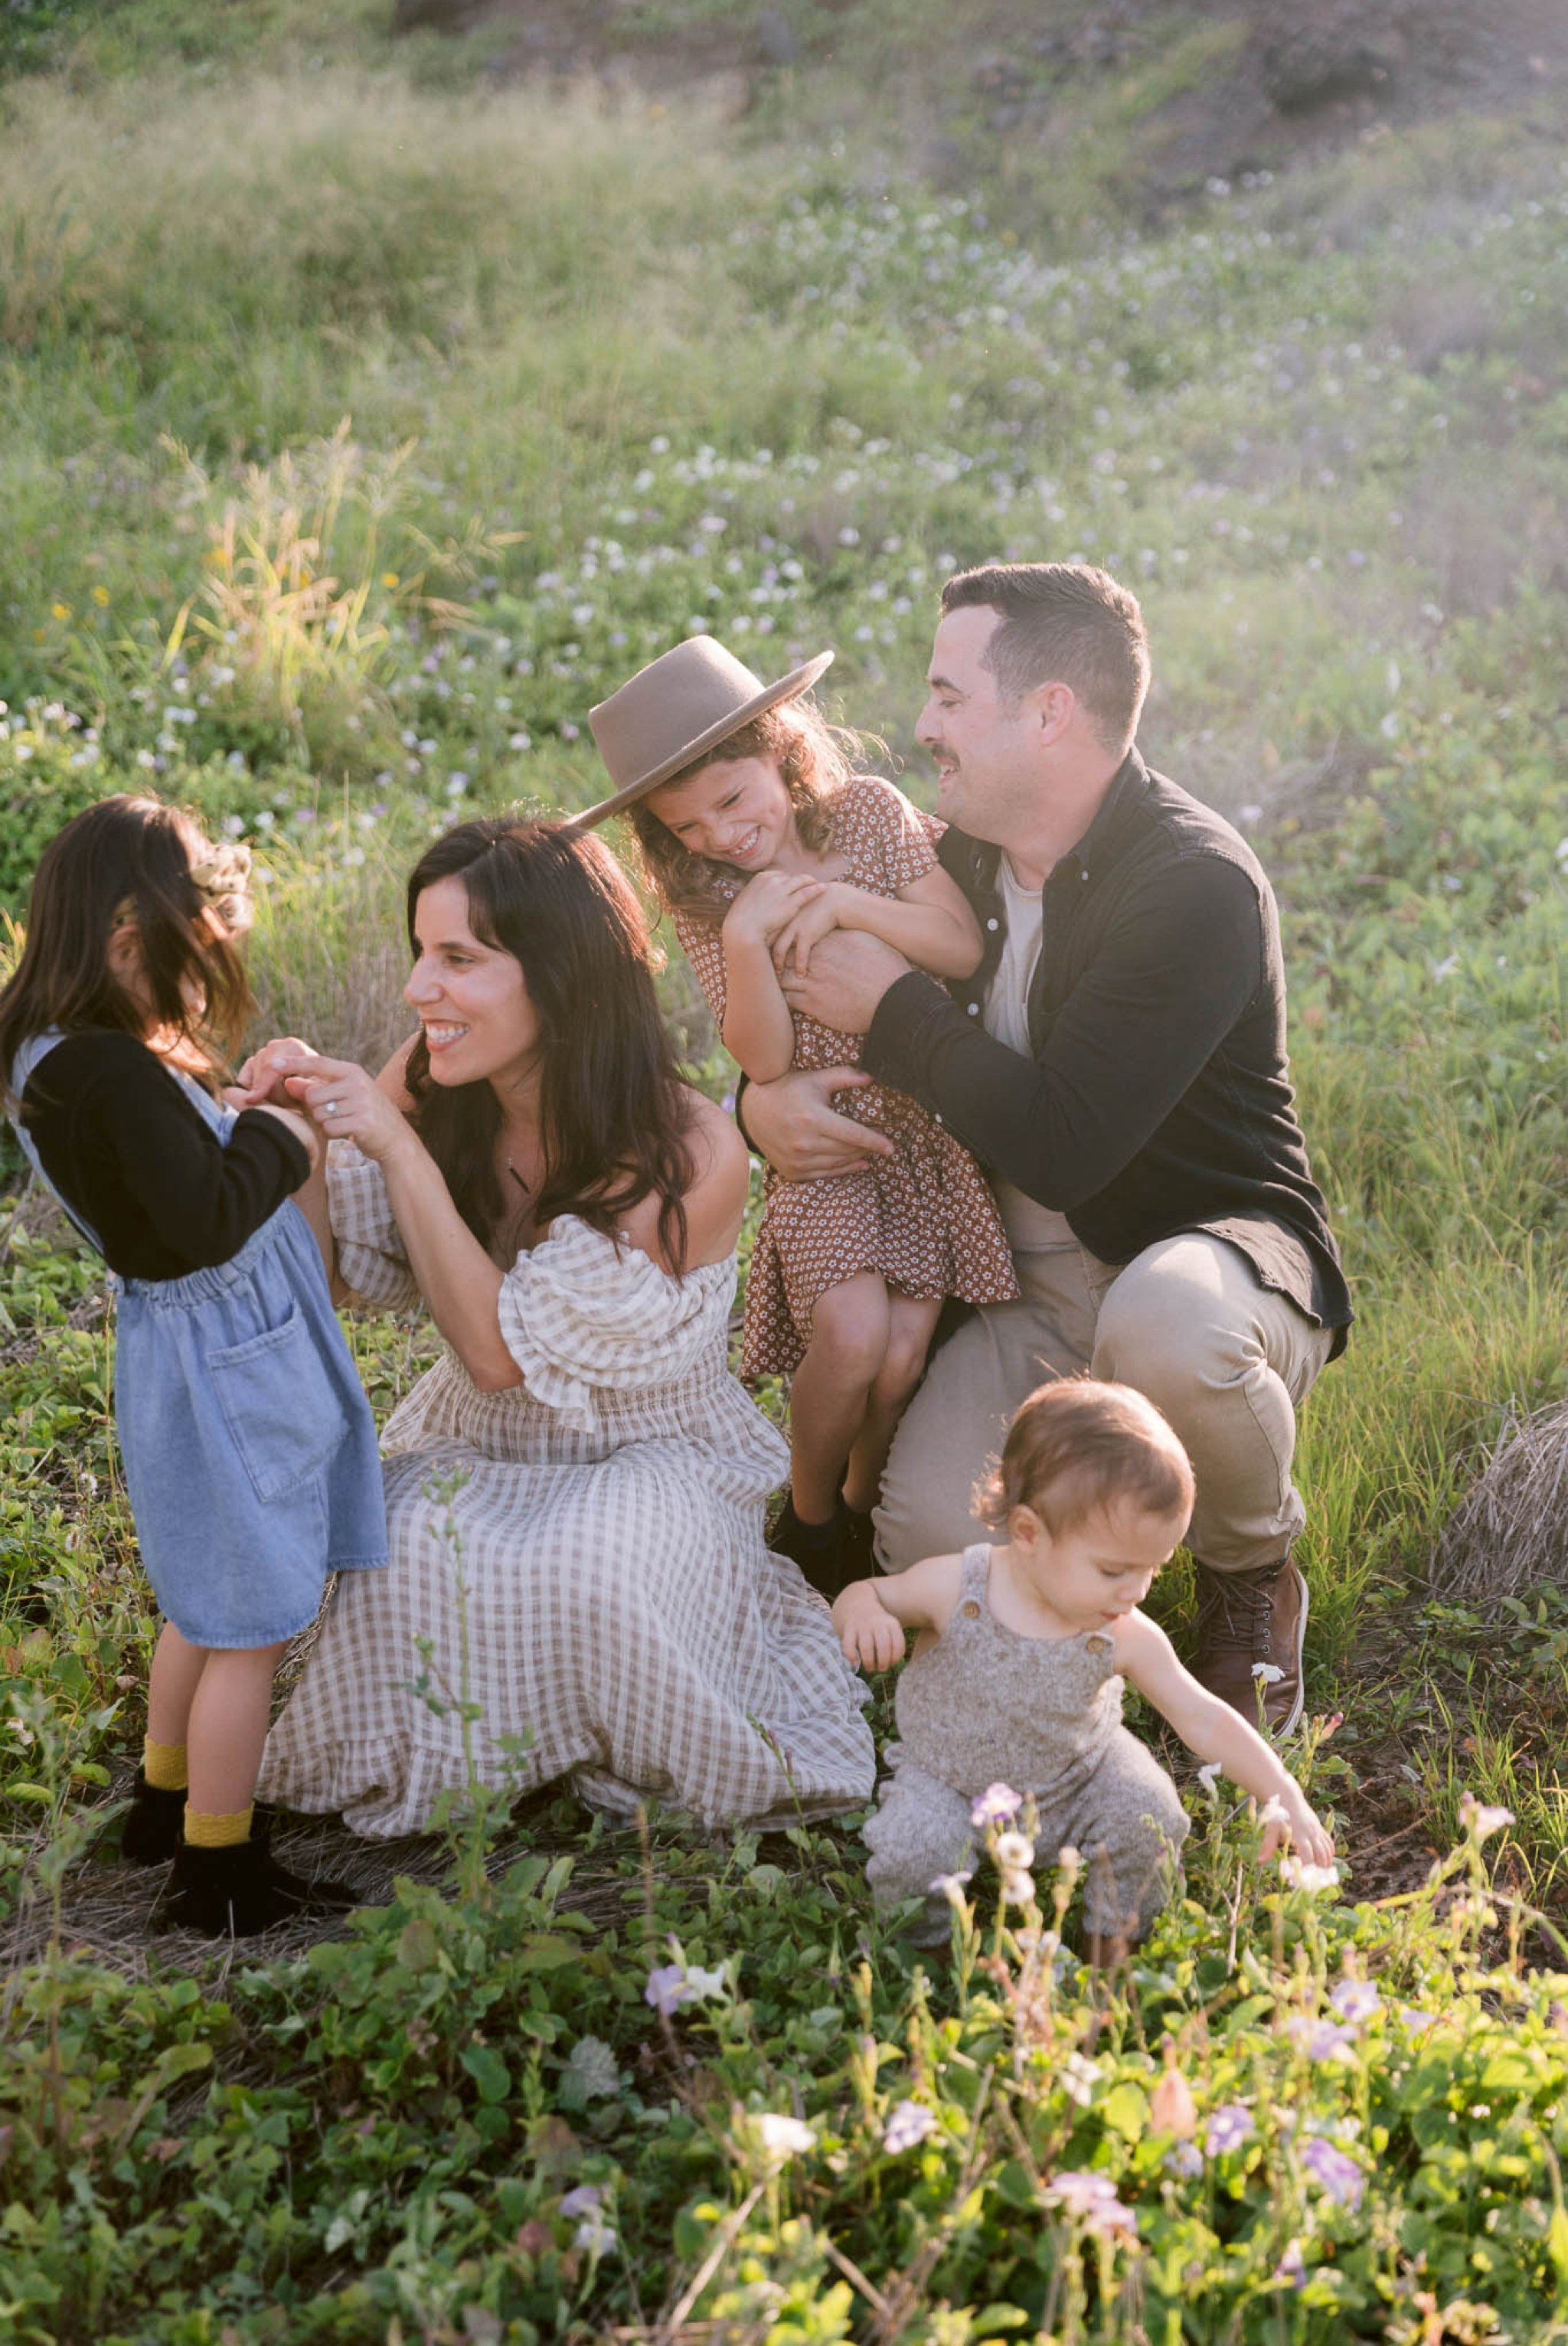 Lifestyle Family Session in the Mountains - Honolulu, Oahu Photographer 